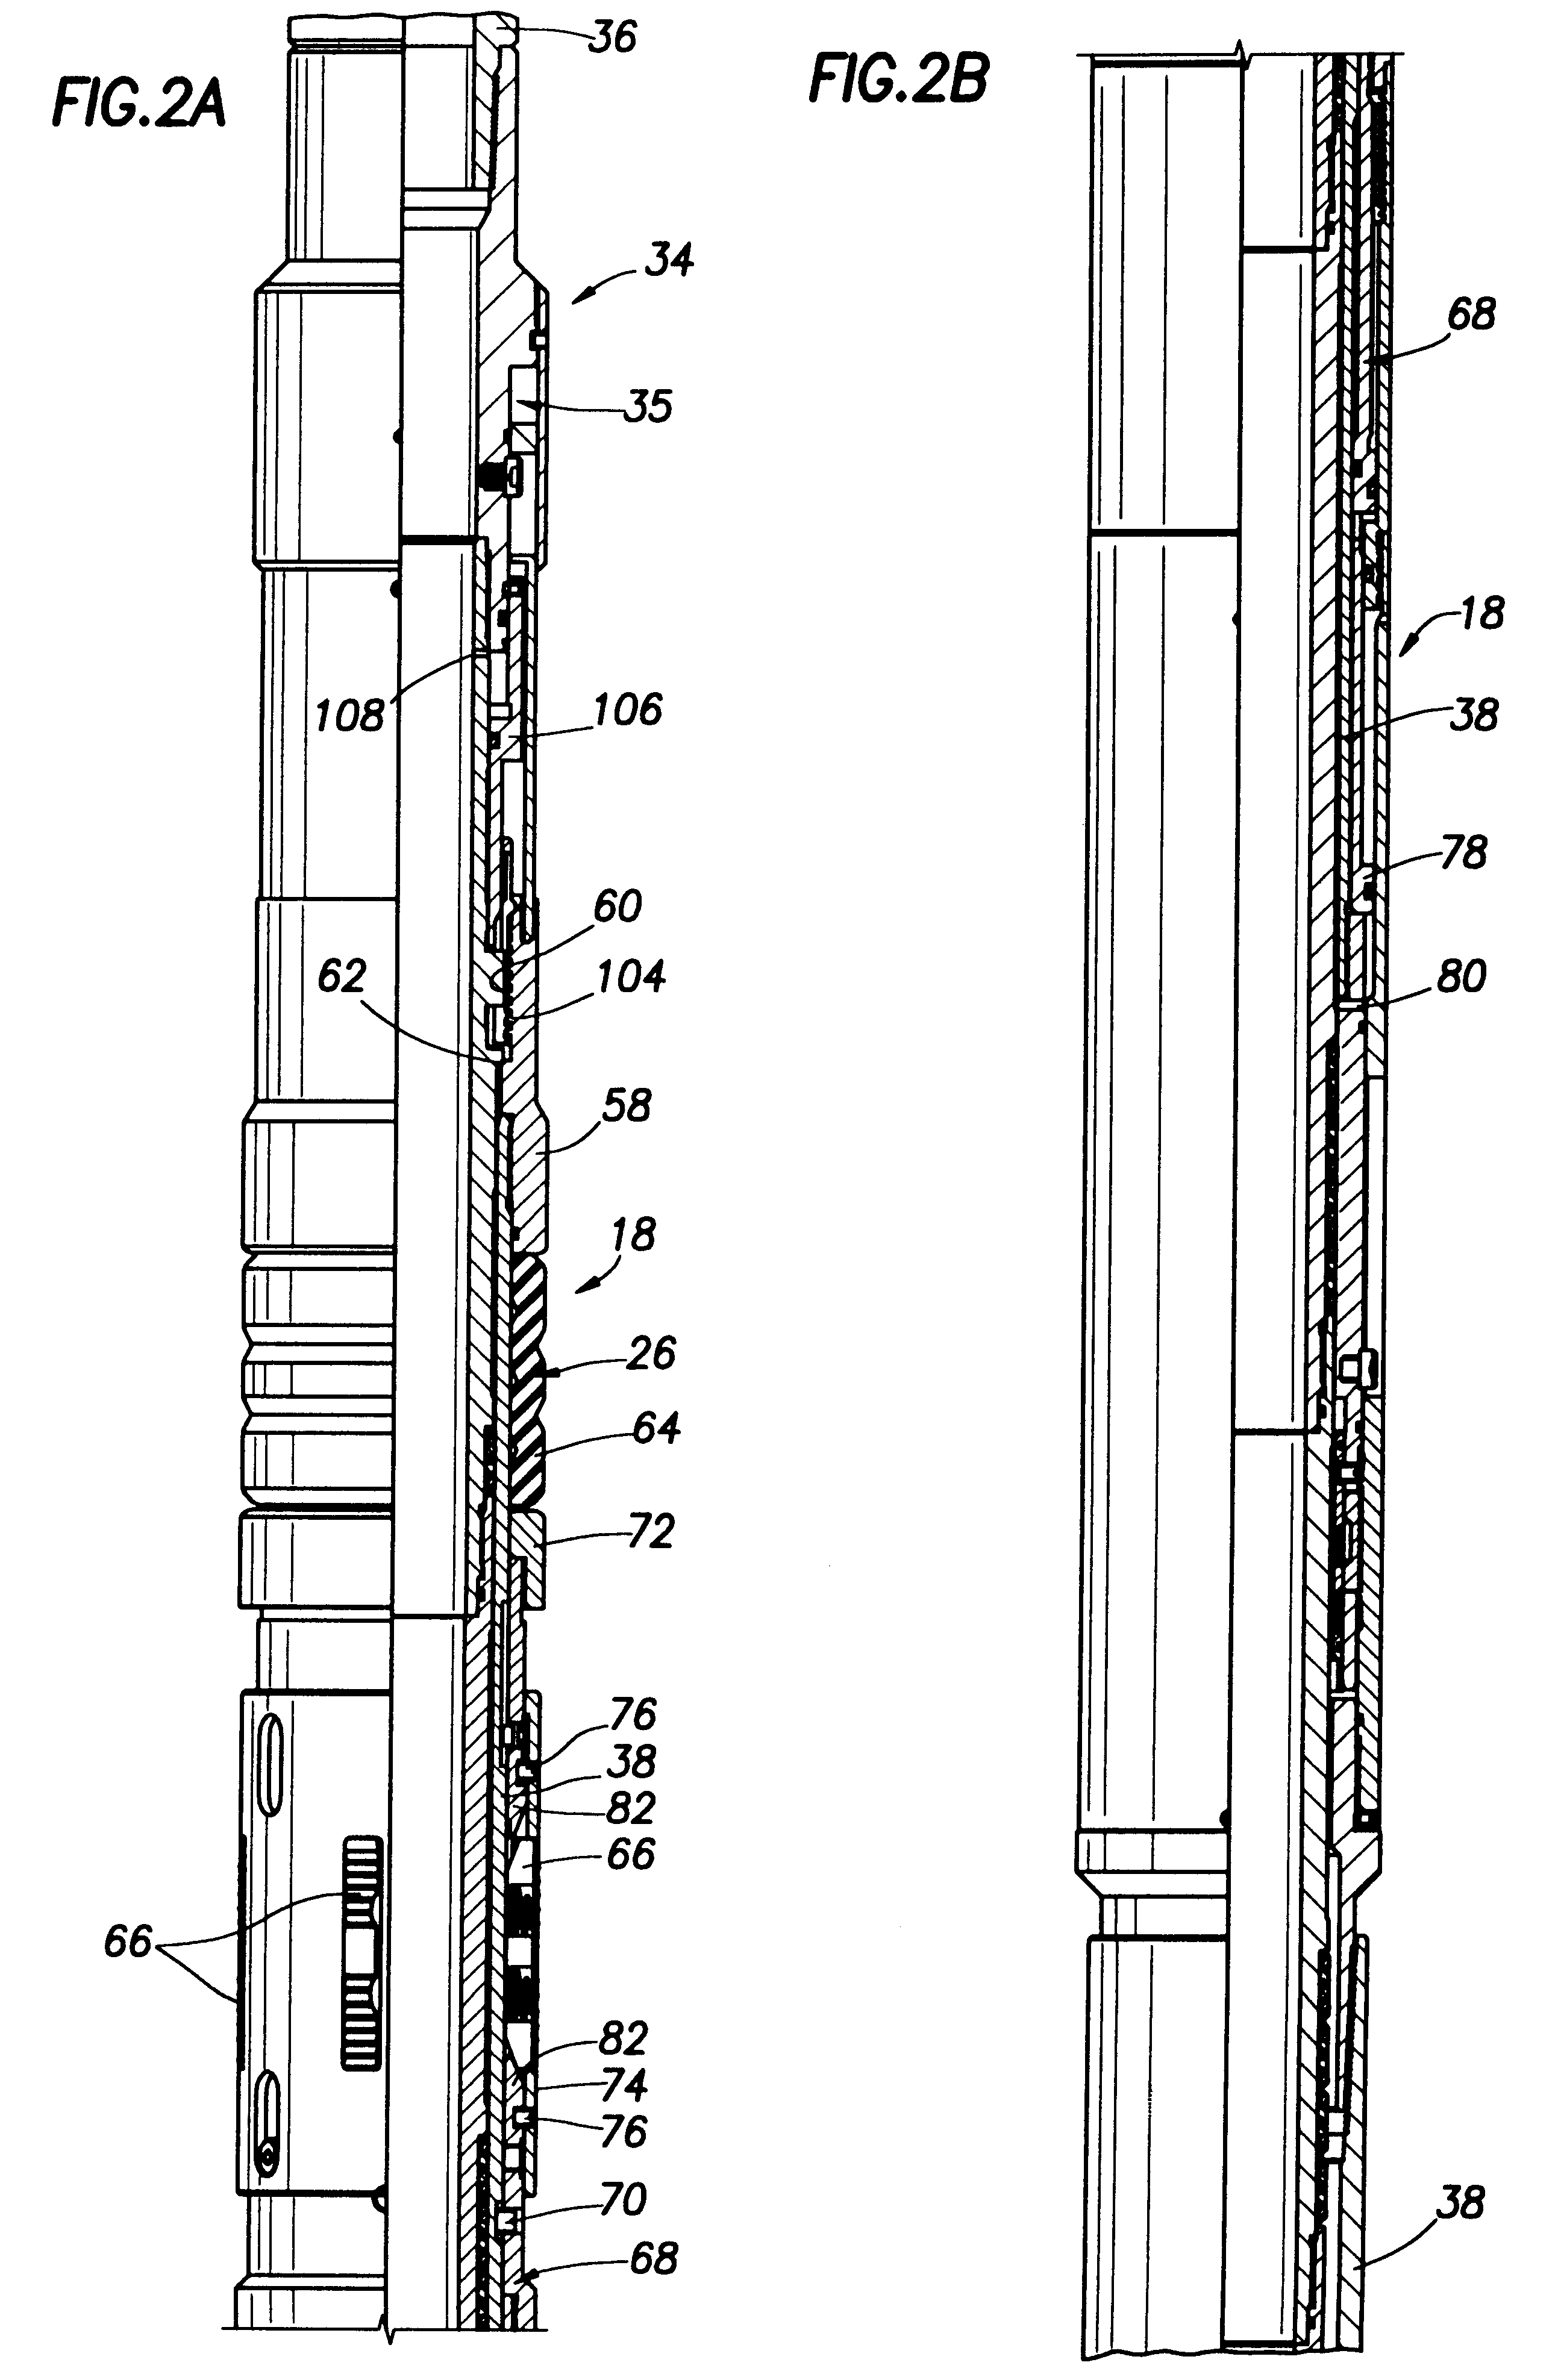 System for installation of well stimulating apparatus downhole utilizing a service tool string